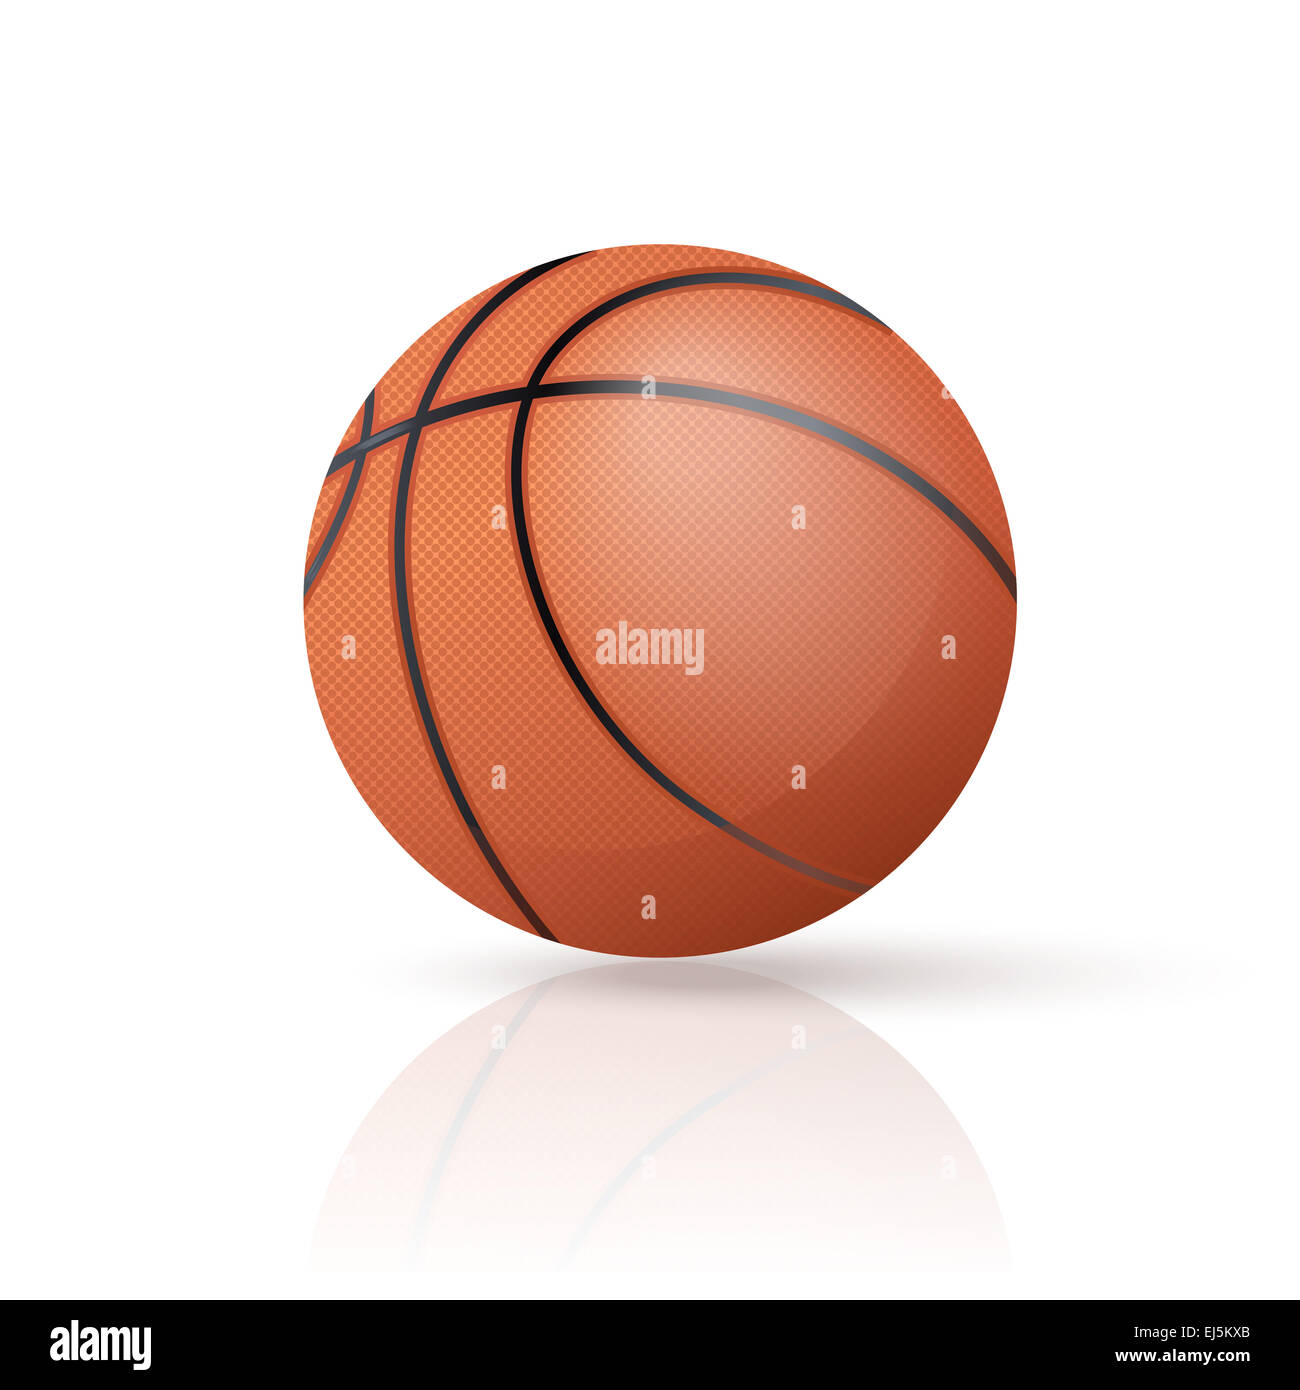 Vector image of an realistic red Basketball Stock Photo